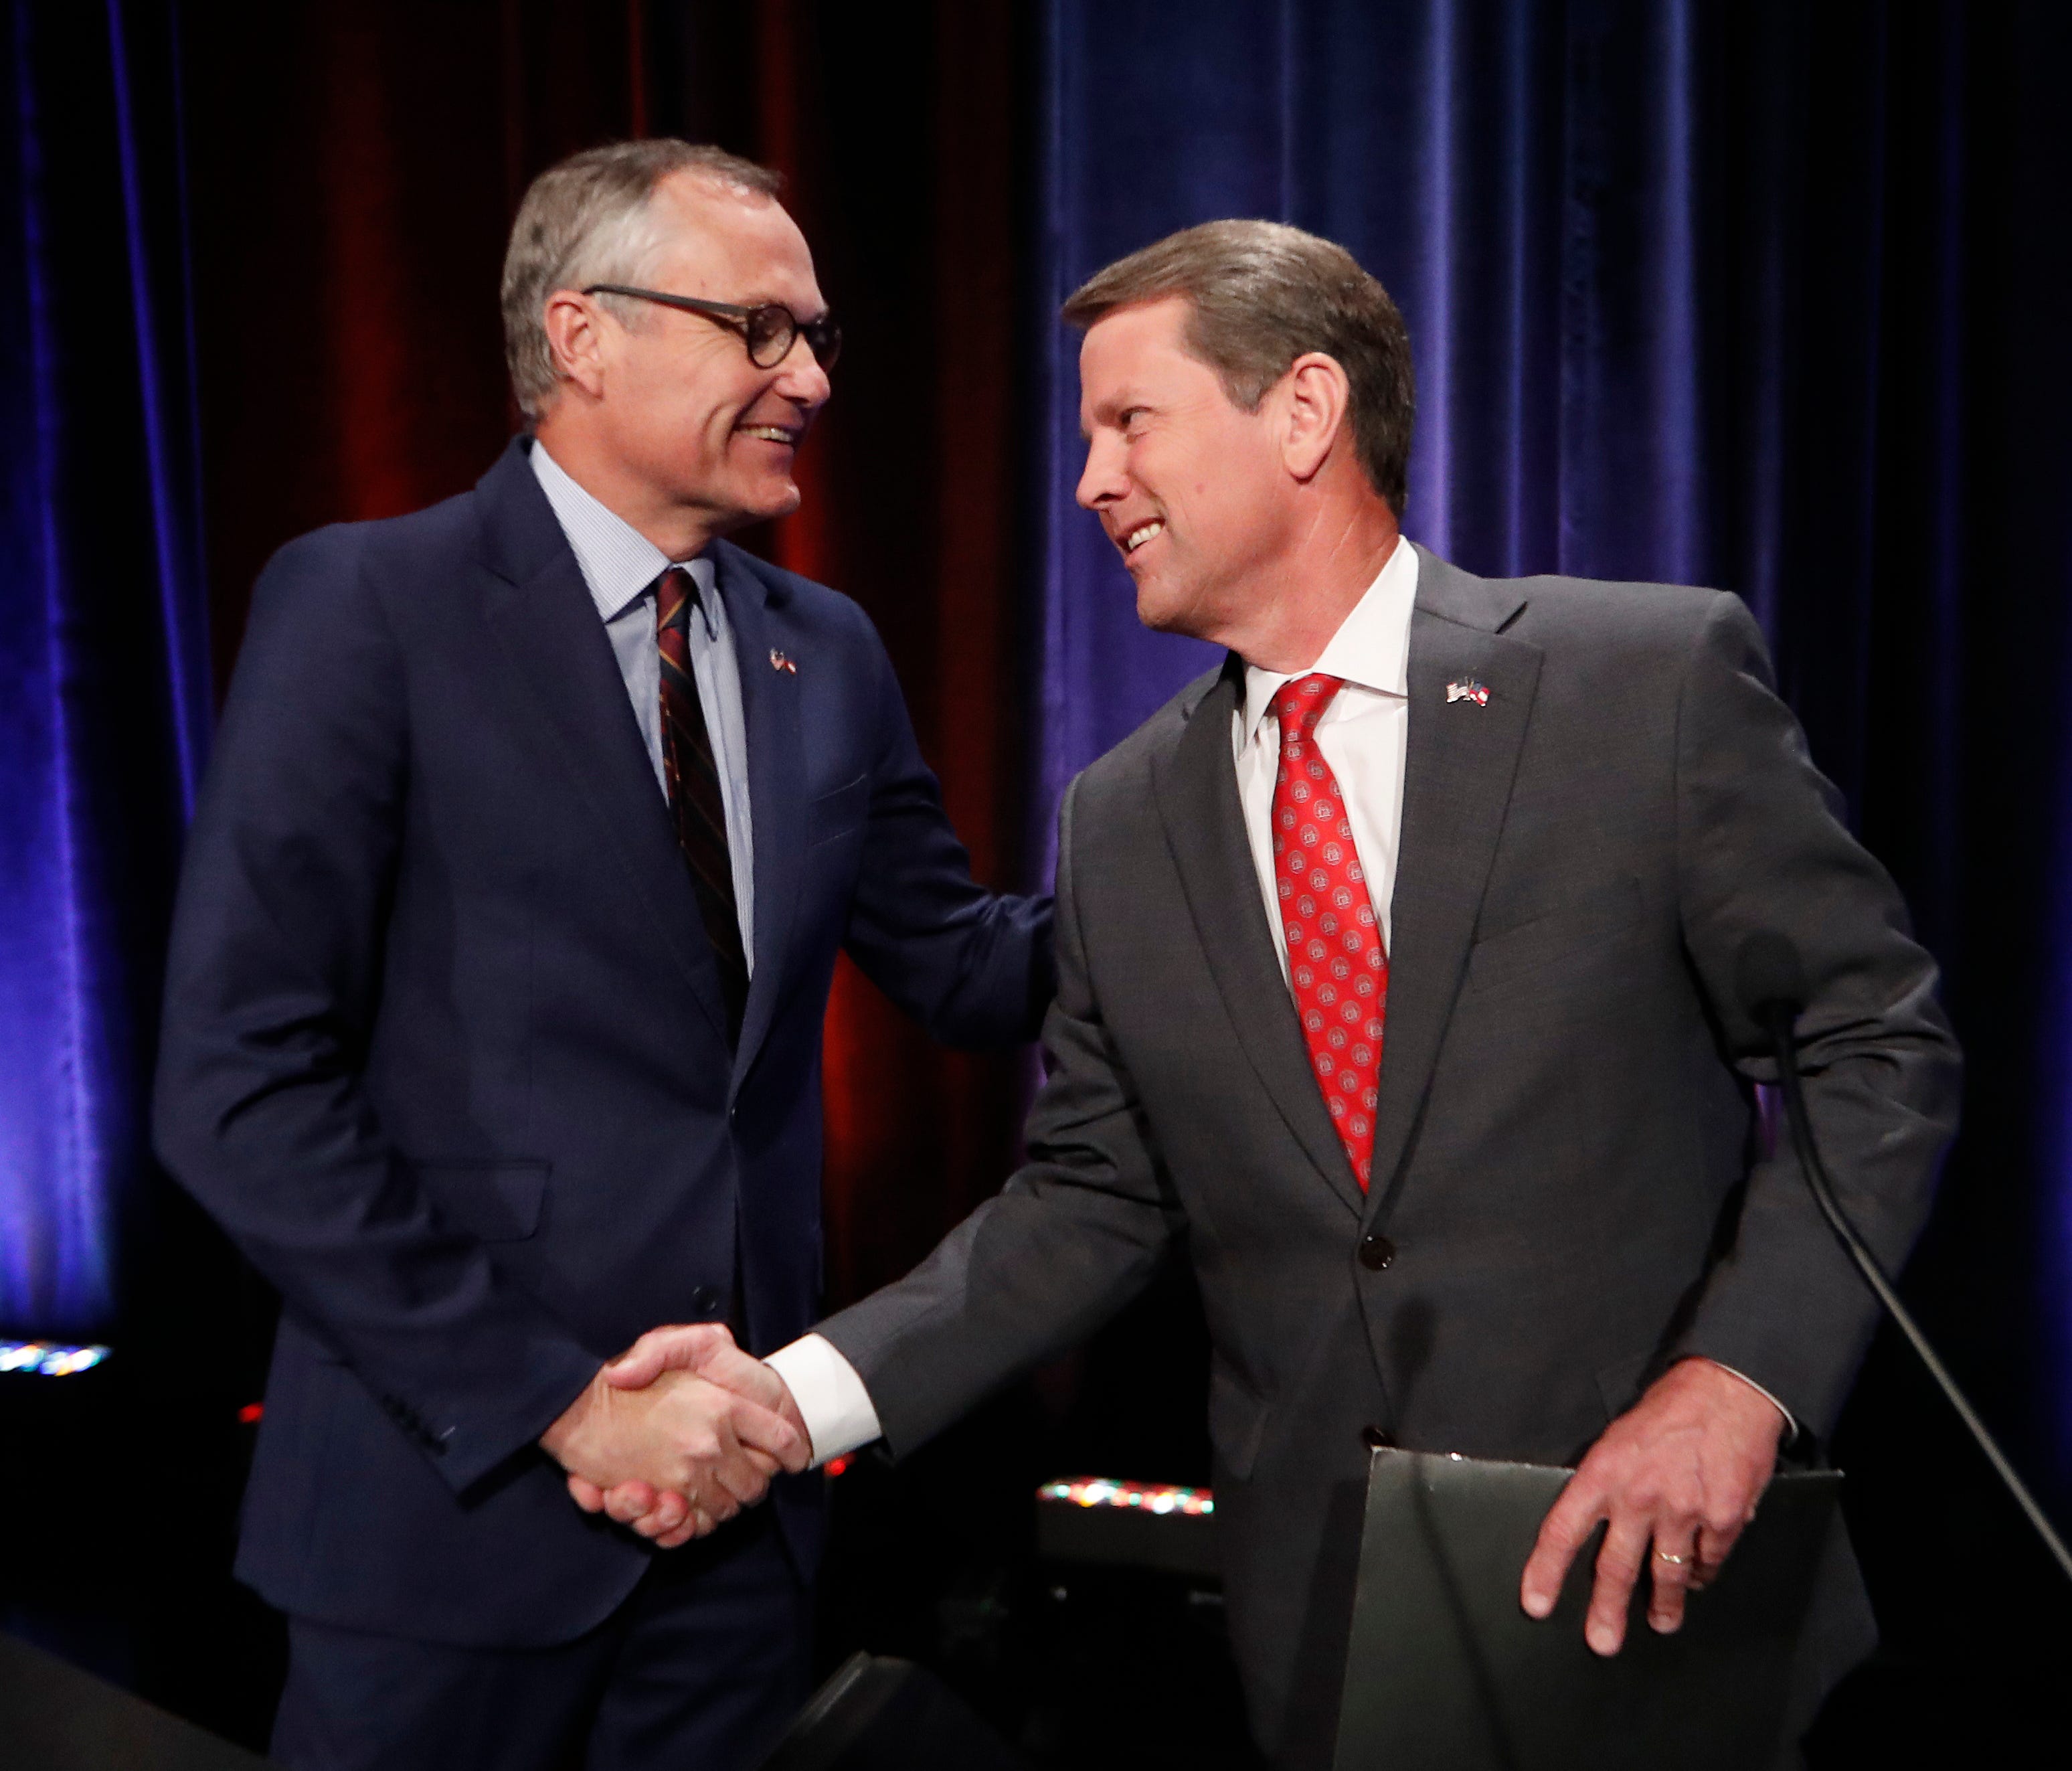 In this July 12, 2018, file photo, Republican candidates for Georgia governor, Lt. Gov. Casey Cagle, left, and Secretary of State Brian Kemp. shake hands after an Atlanta Press Club debate at Georgia Public Television in Atlanta. The two will face ea